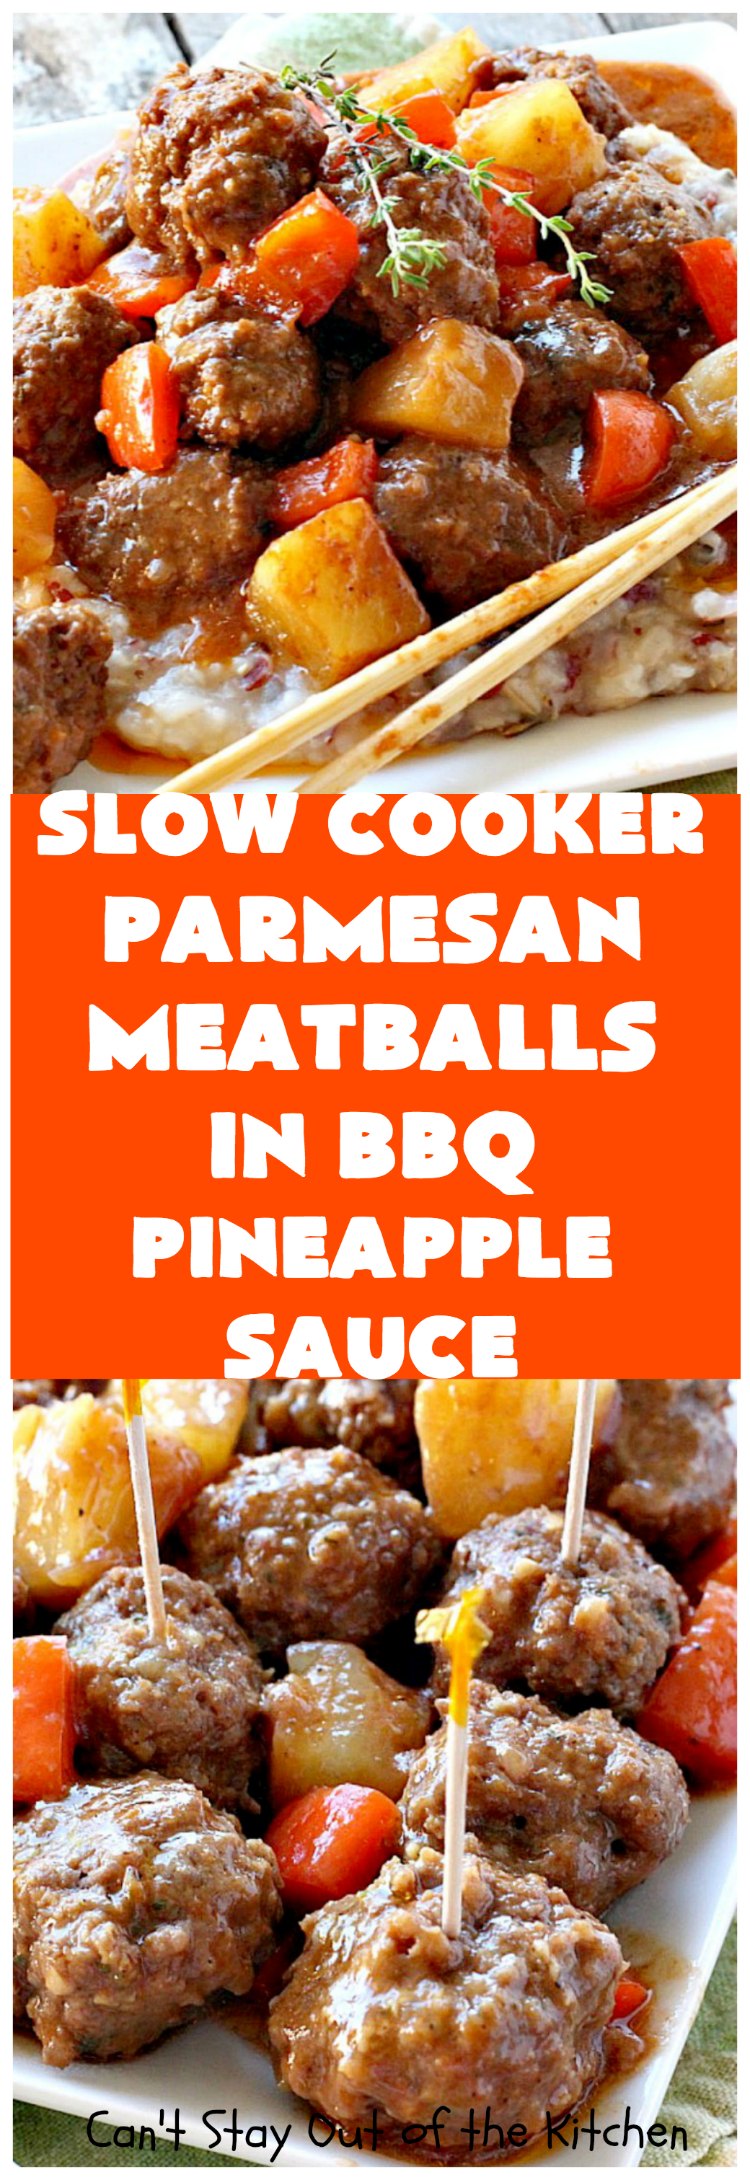 Slow Cooker Parmesan Meatball in BBQ Pineapple Sauce | Can't Stay Out of the Kitchen